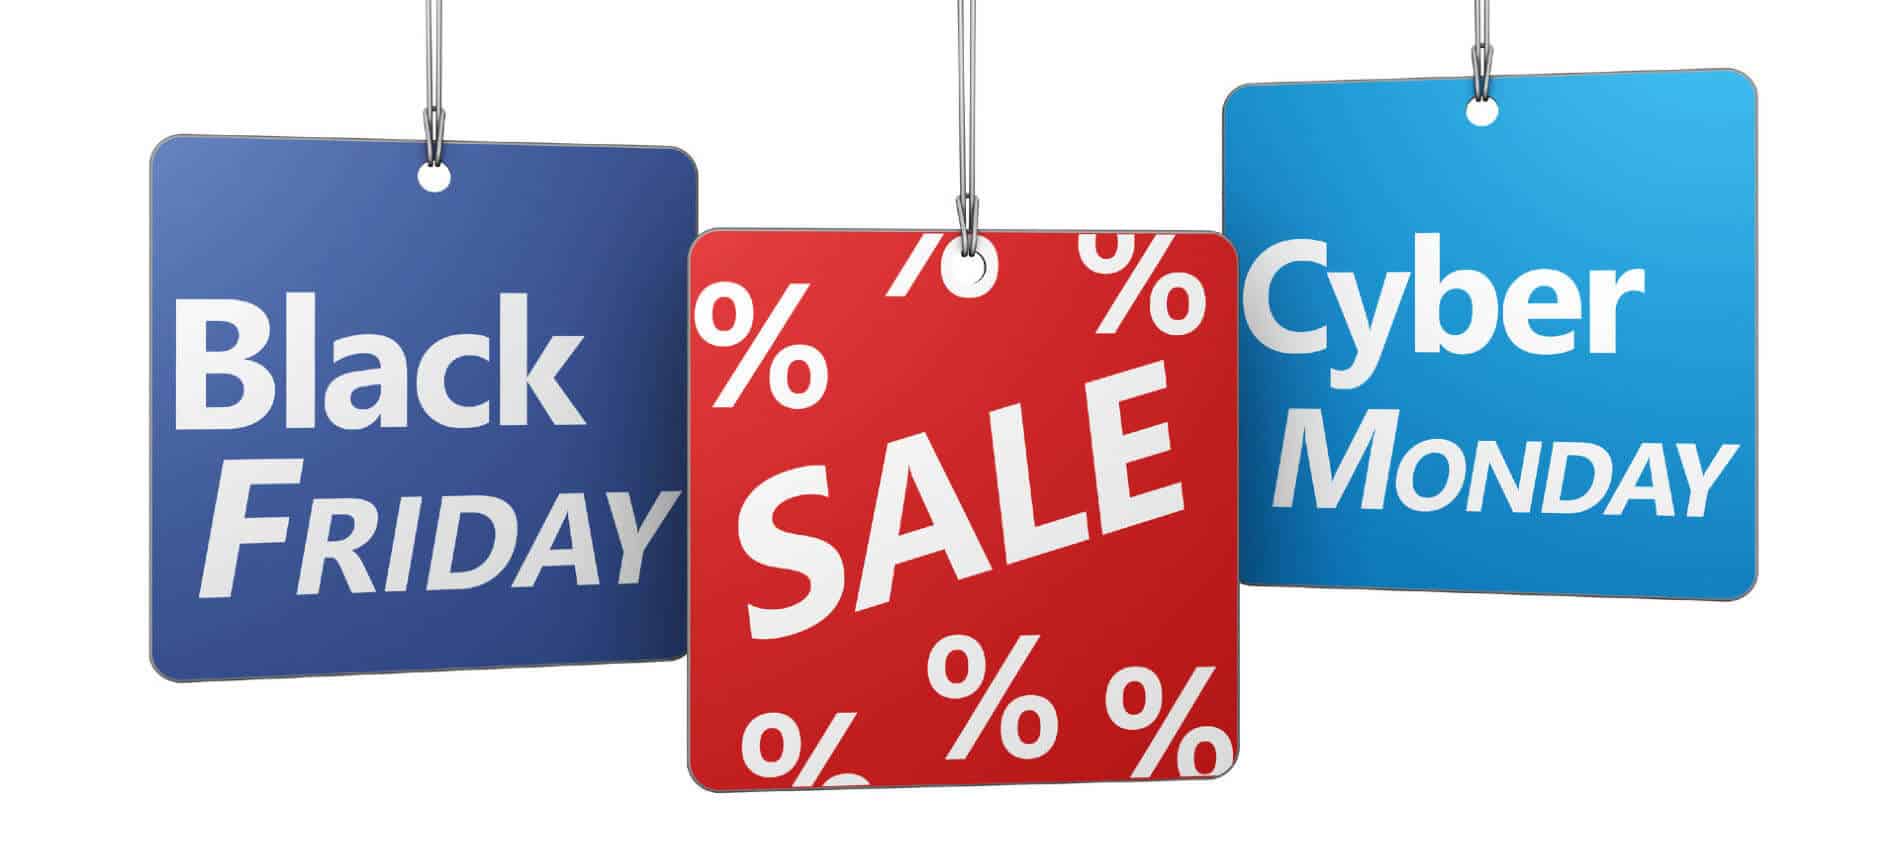 blue and red price tags with black friday and cyber monday sales